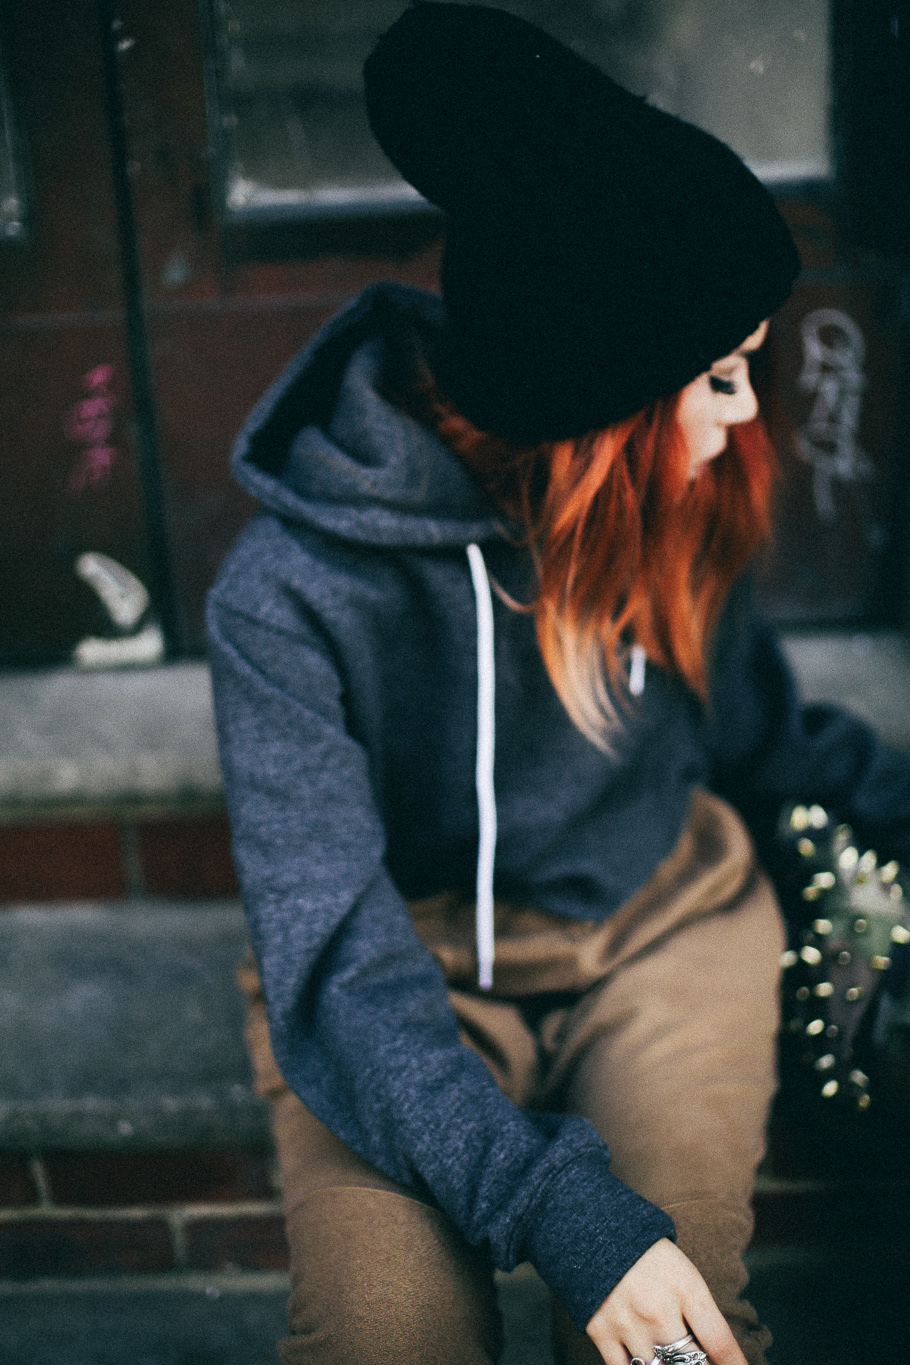 Le Happy wearing cropped hoodie and a beanie